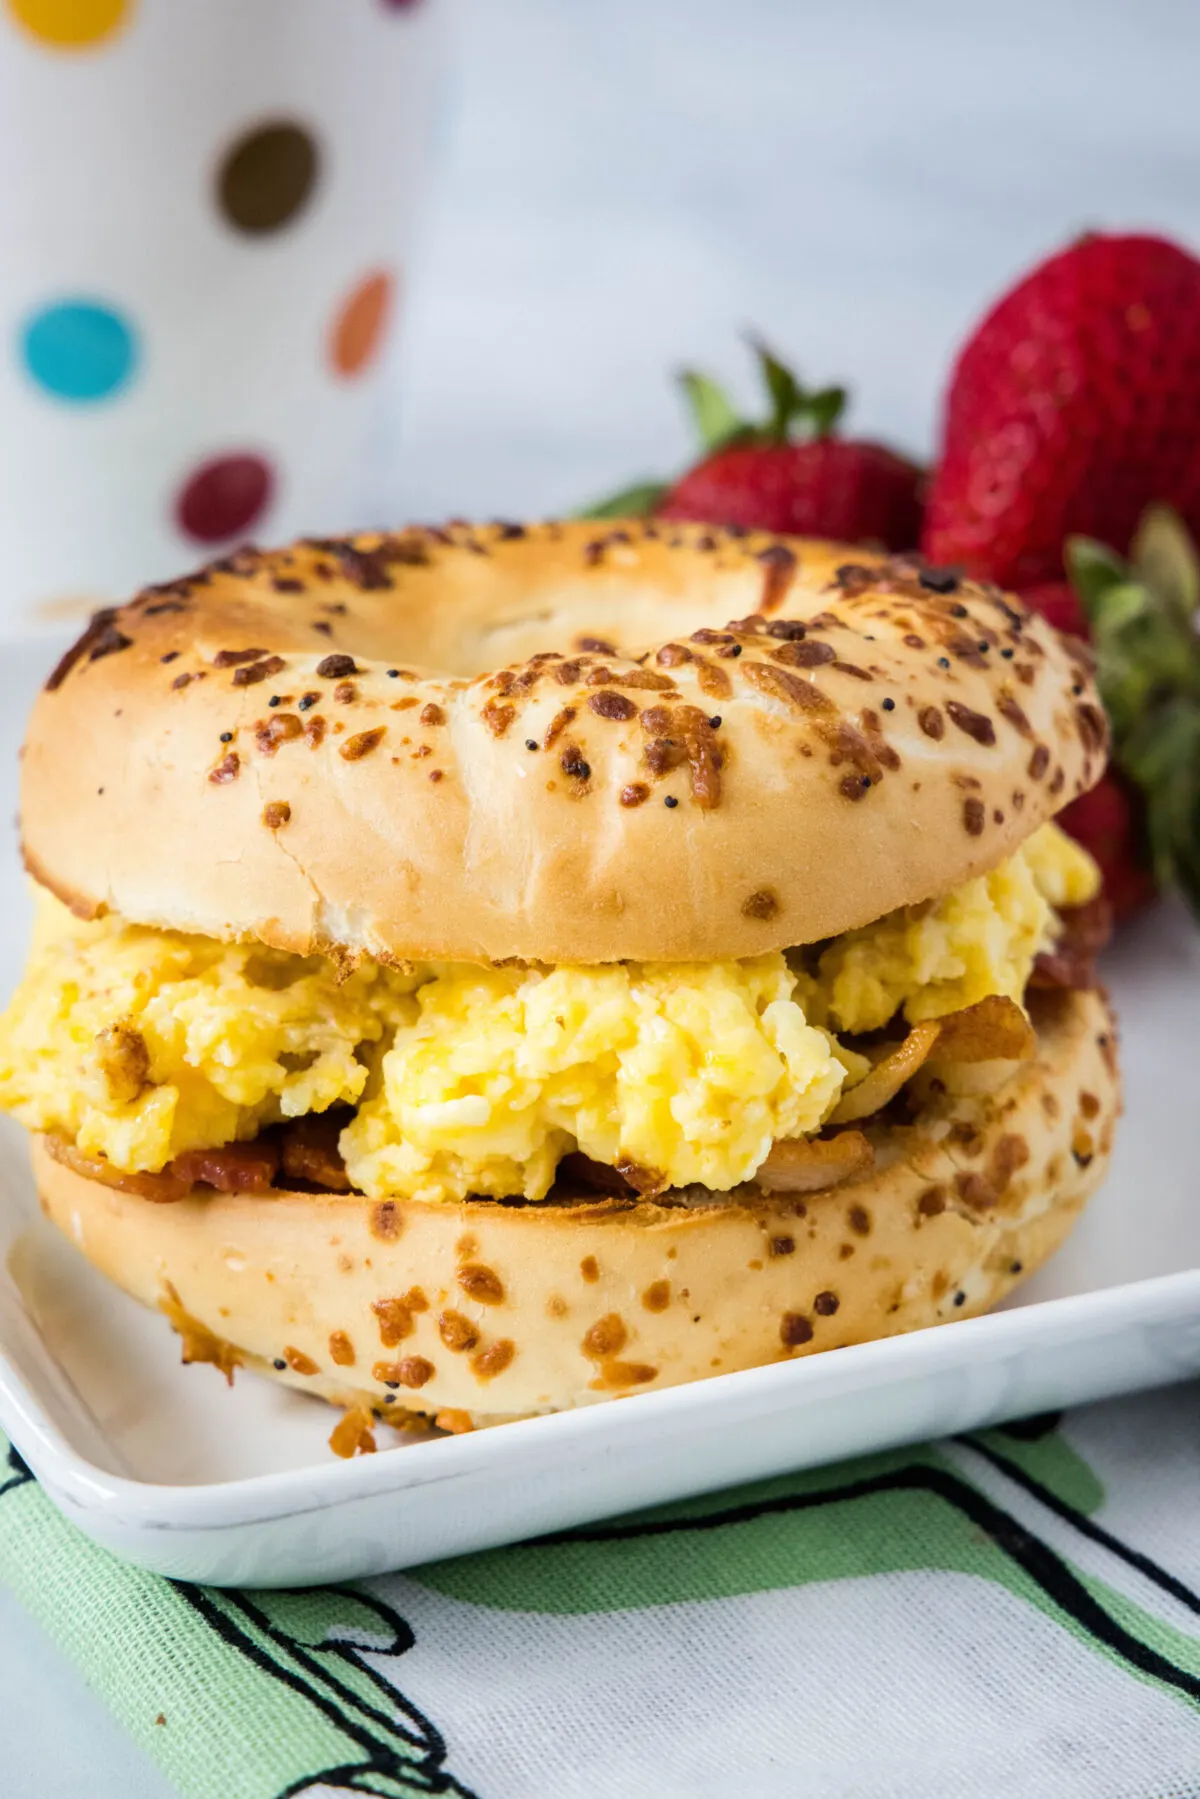 A bagel sandwich with eggs on a plate with strawberries